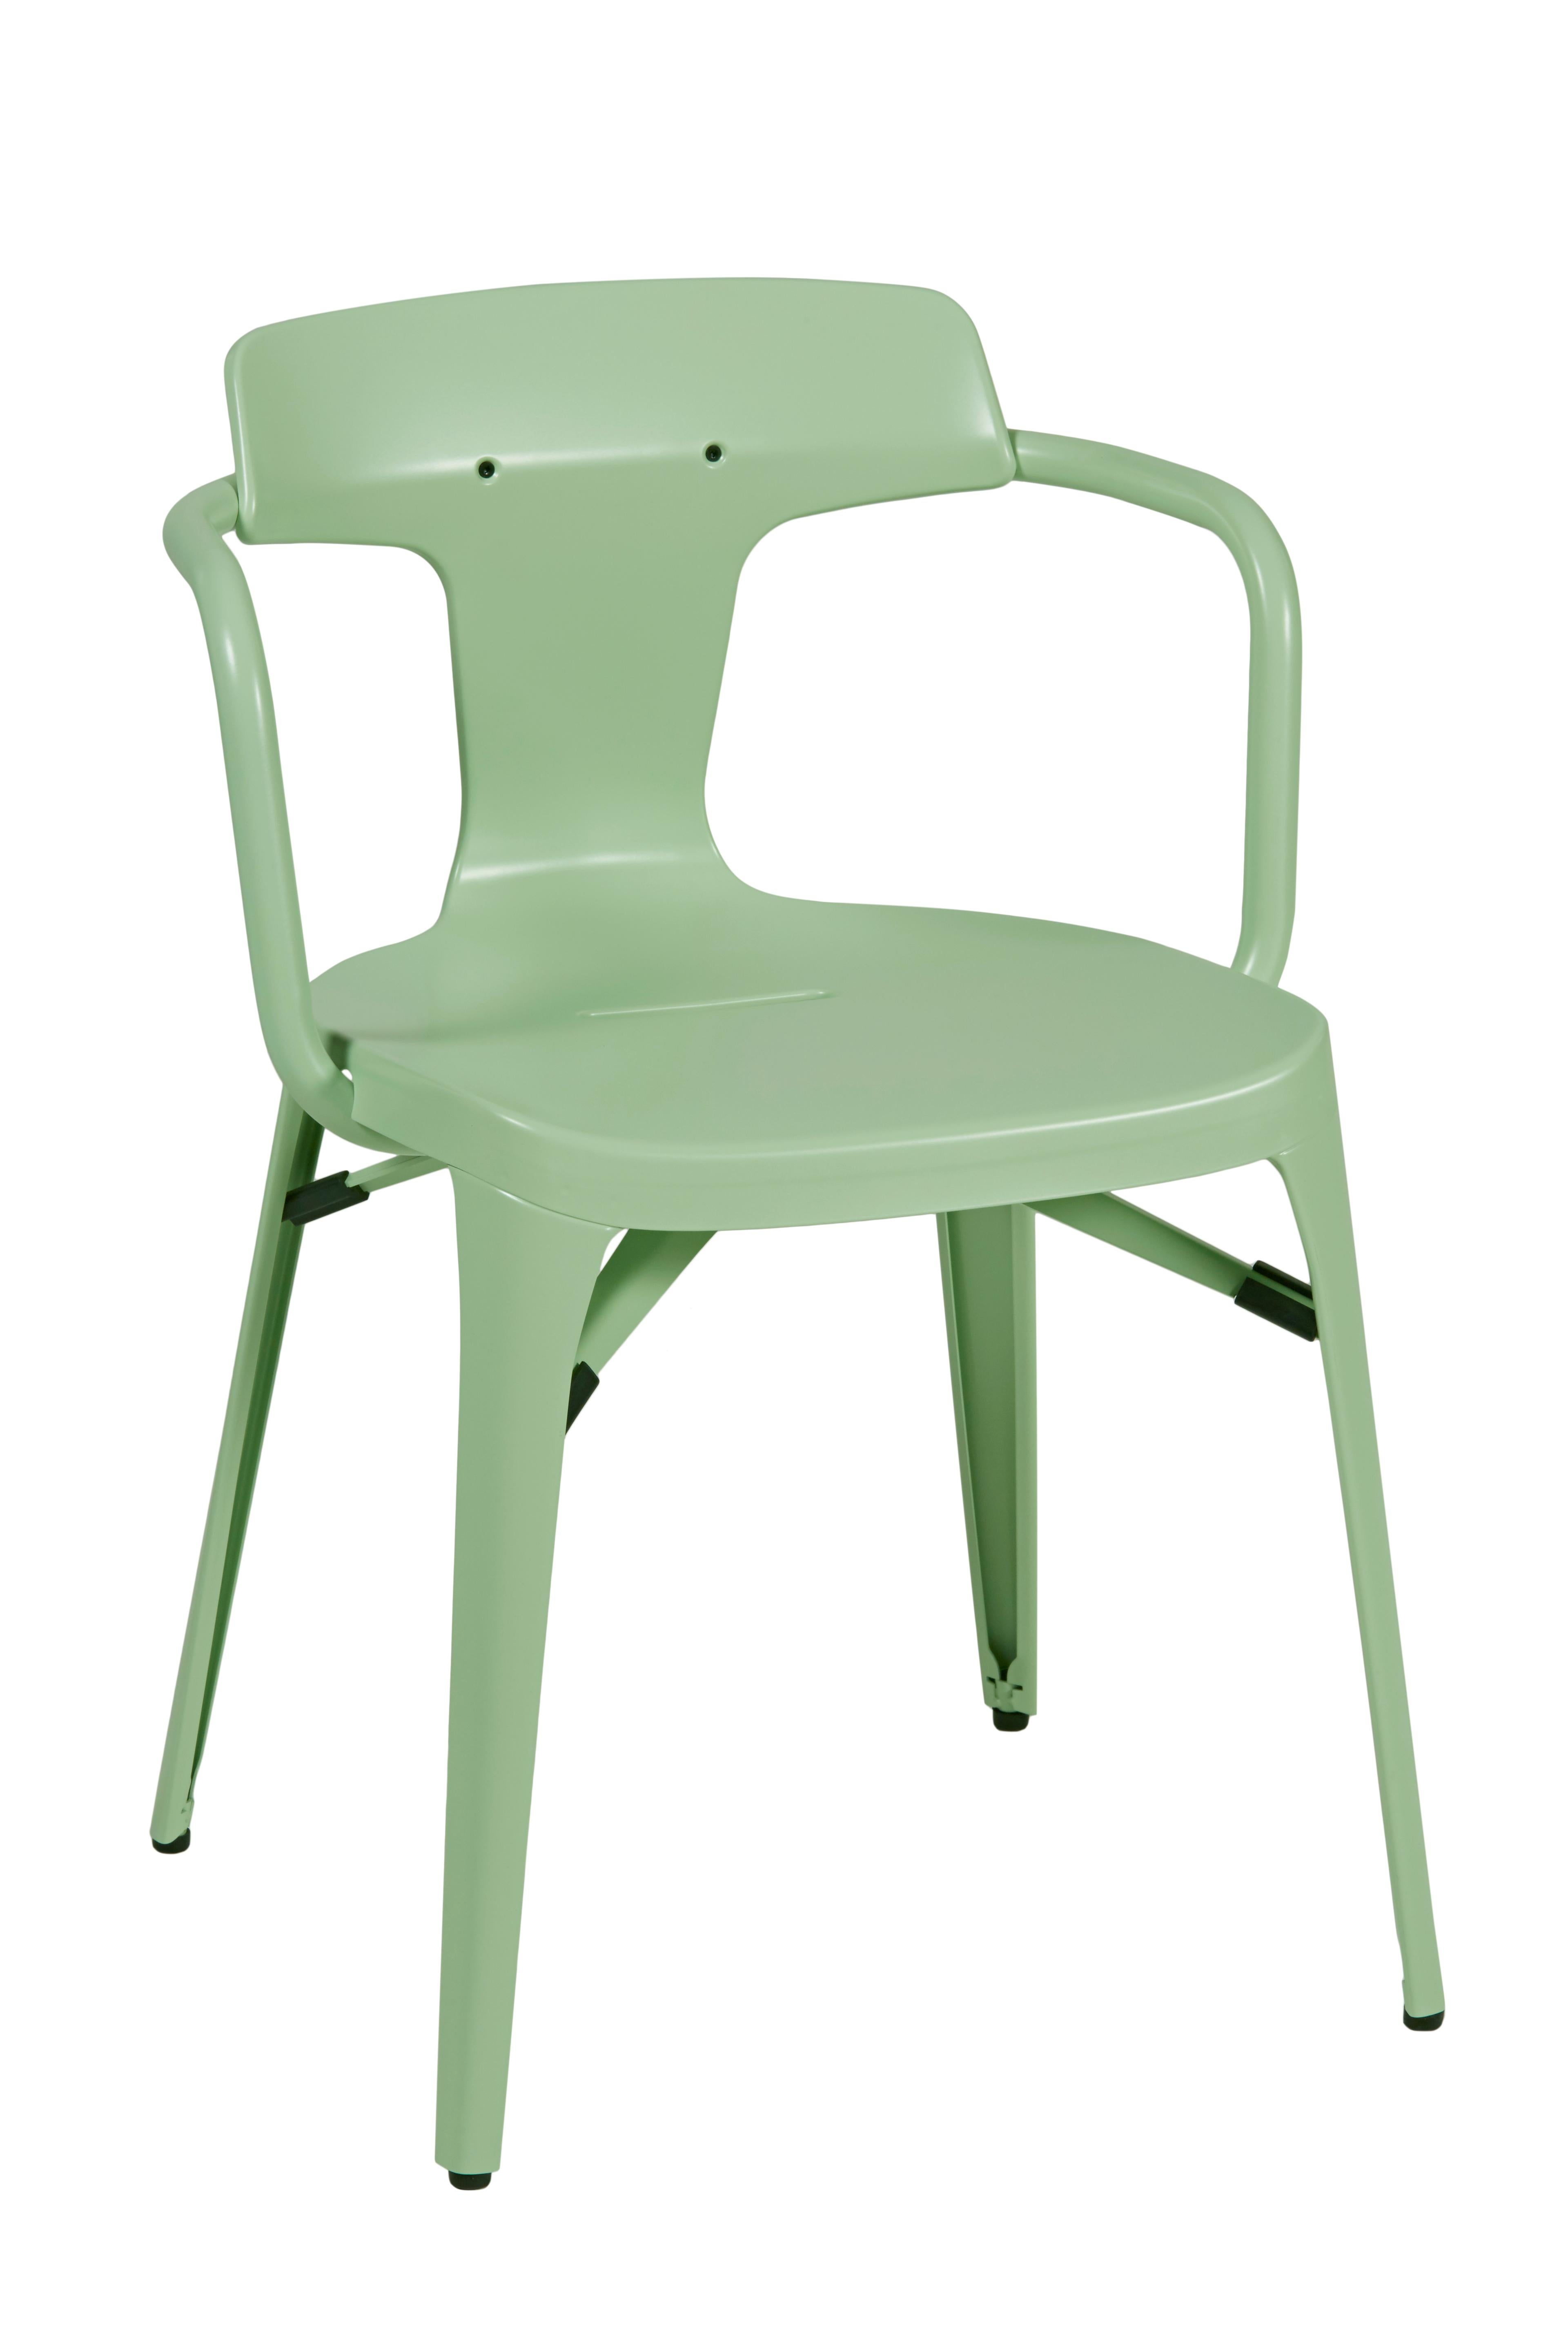 Im Angebot: T14 Chair in Pop Colors by Patrick Norguet and Tolix, Green (Vert Anis) 3